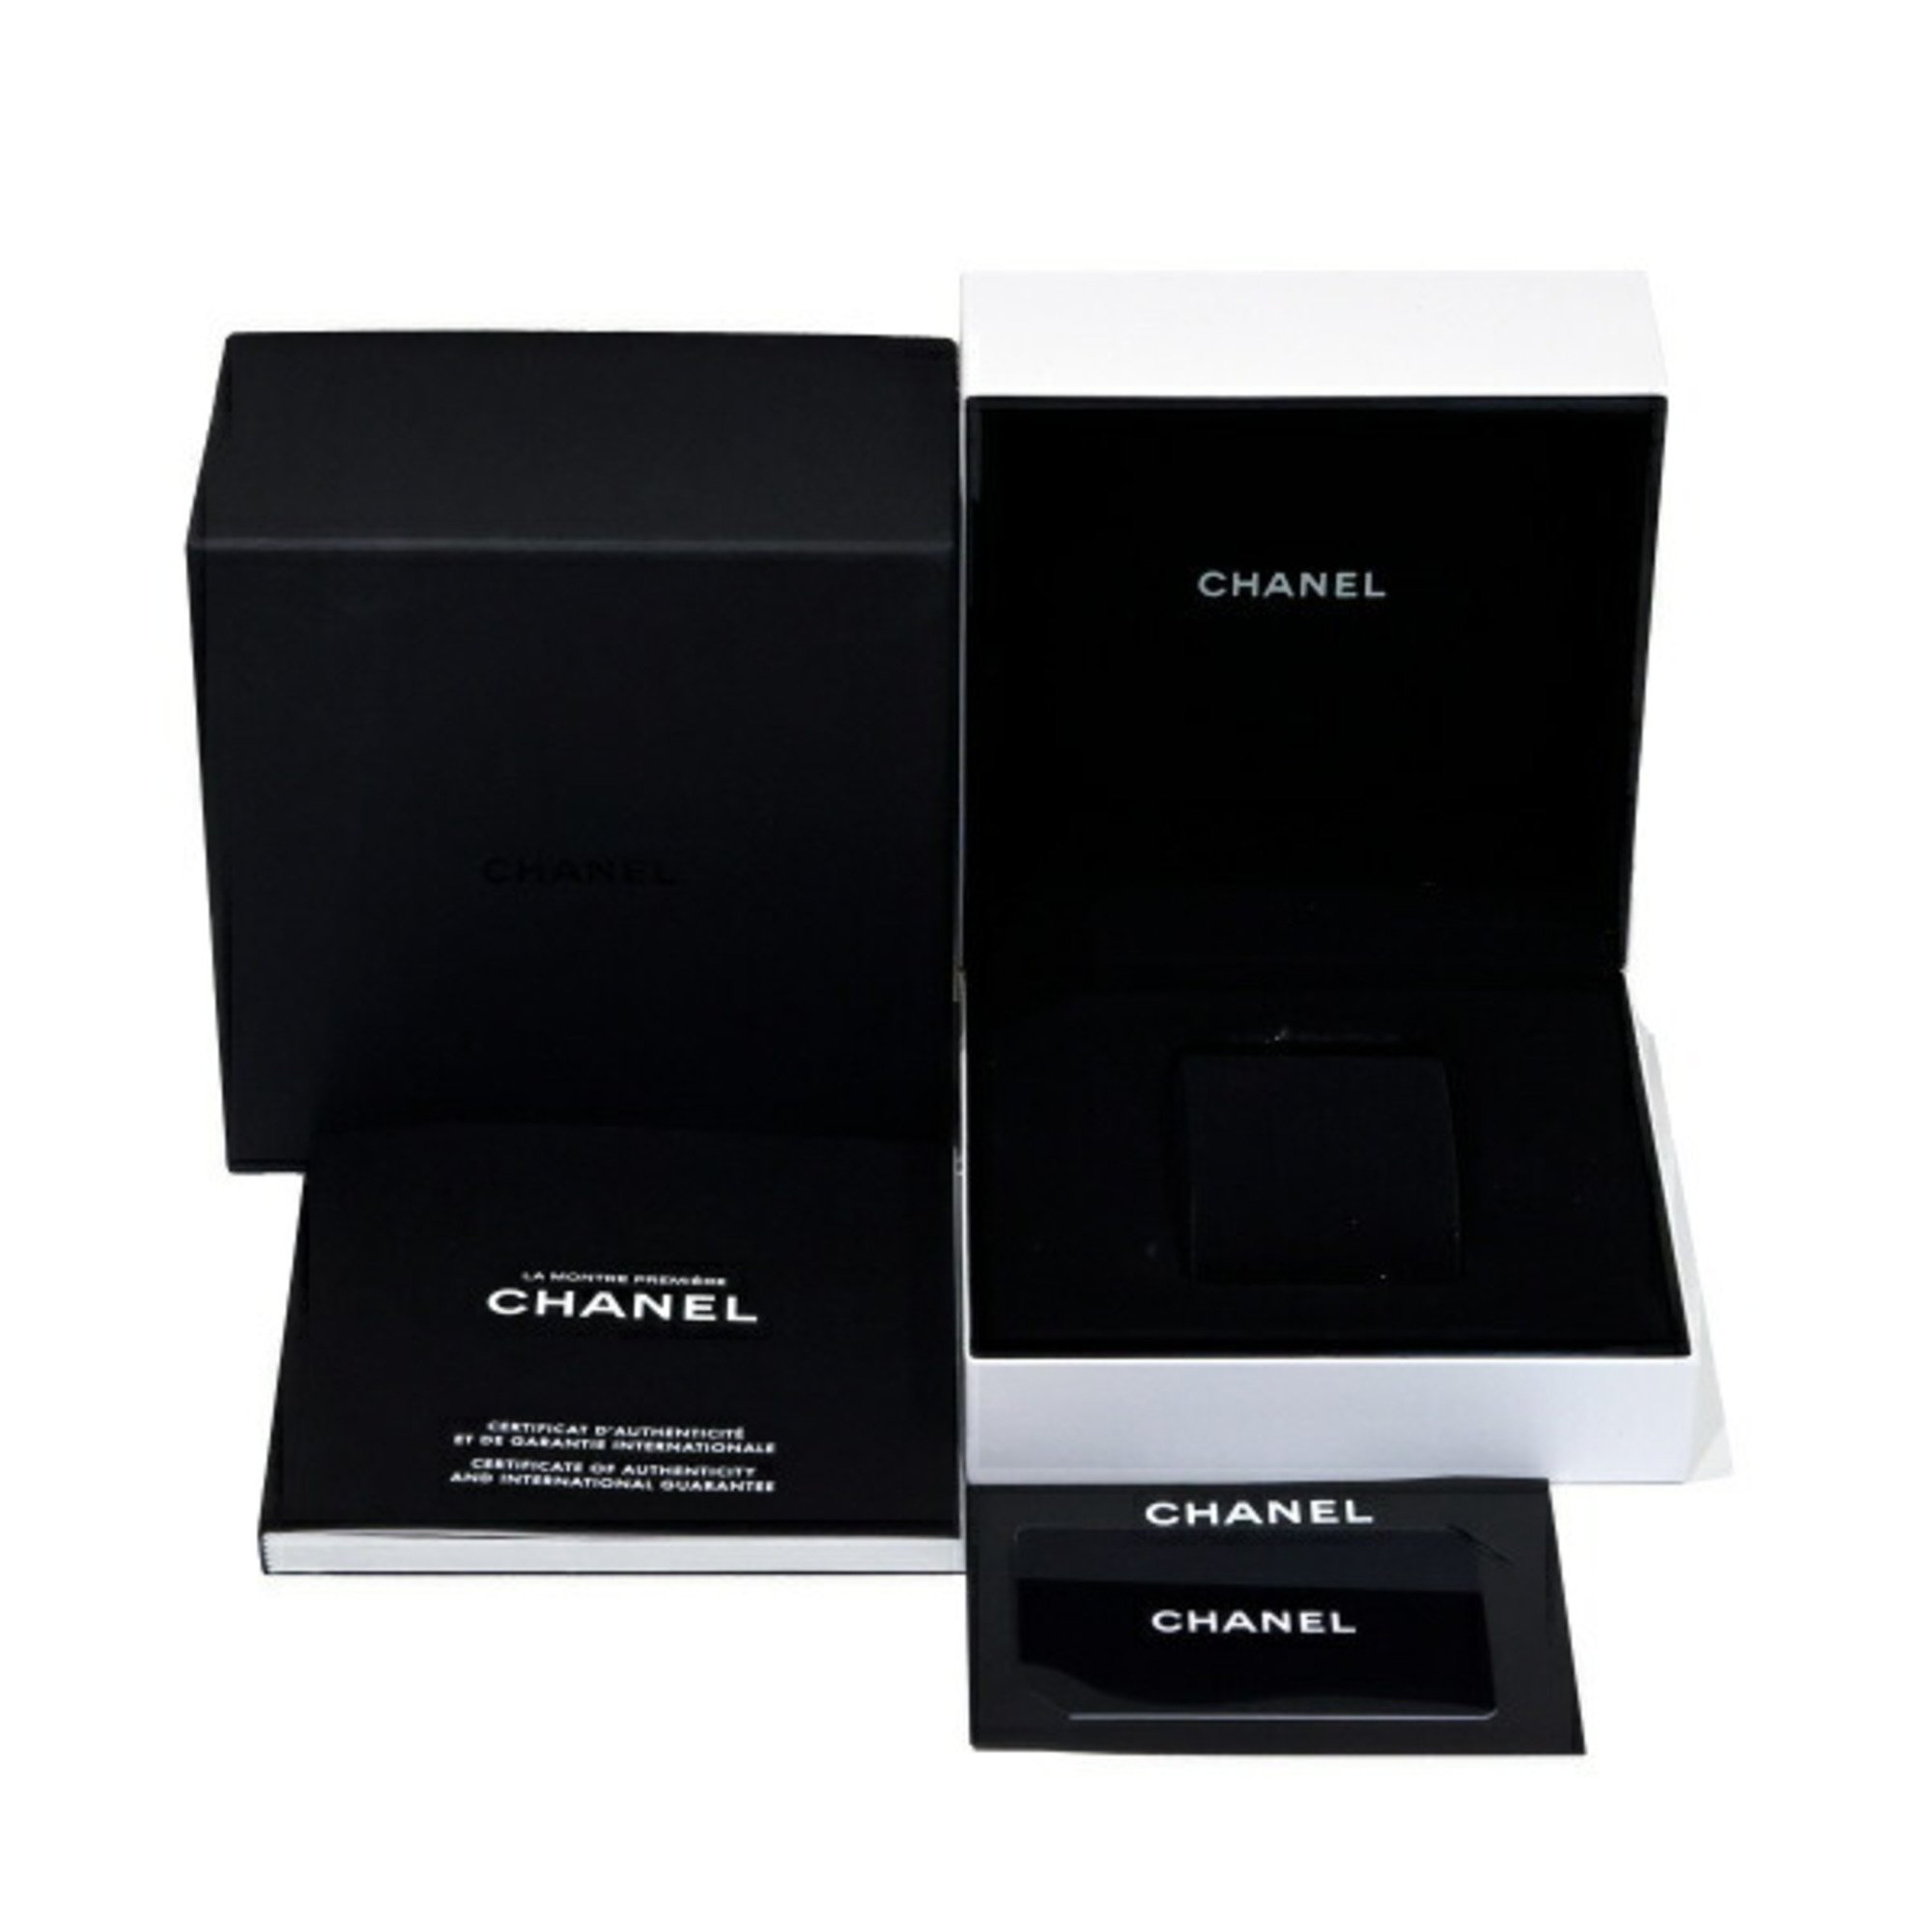 CHANEL Premiere Rock Limited to 1000 pieces worldwide H5583 Mirror dial watch for women